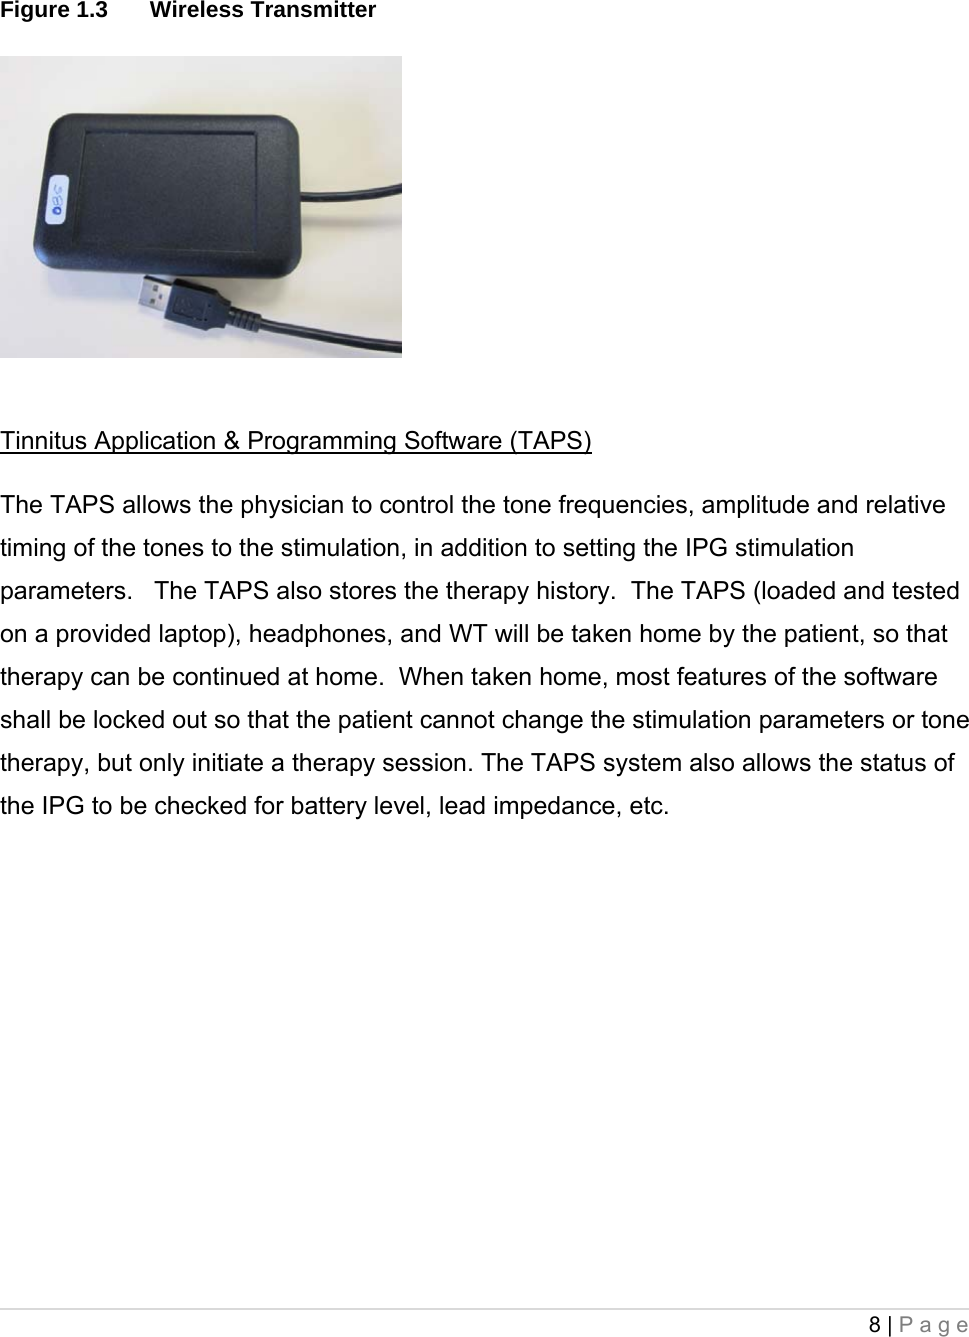 8 | Page   Figure 1.3  Wireless Transmitter Tinnitus Application &amp; Programming Software (TAPS) The TAPS allows the physician to control the tone frequencies, amplitude and relative timing of the tones to the stimulation, in addition to setting the IPG stimulation parameters.   The TAPS also stores the therapy history.  The TAPS (loaded and tested on a provided laptop), headphones, and WT will be taken home by the patient, so that therapy can be continued at home.  When taken home, most features of the software shall be locked out so that the patient cannot change the stimulation parameters or tone therapy, but only initiate a therapy session. The TAPS system also allows the status of the IPG to be checked for battery level, lead impedance, etc.    